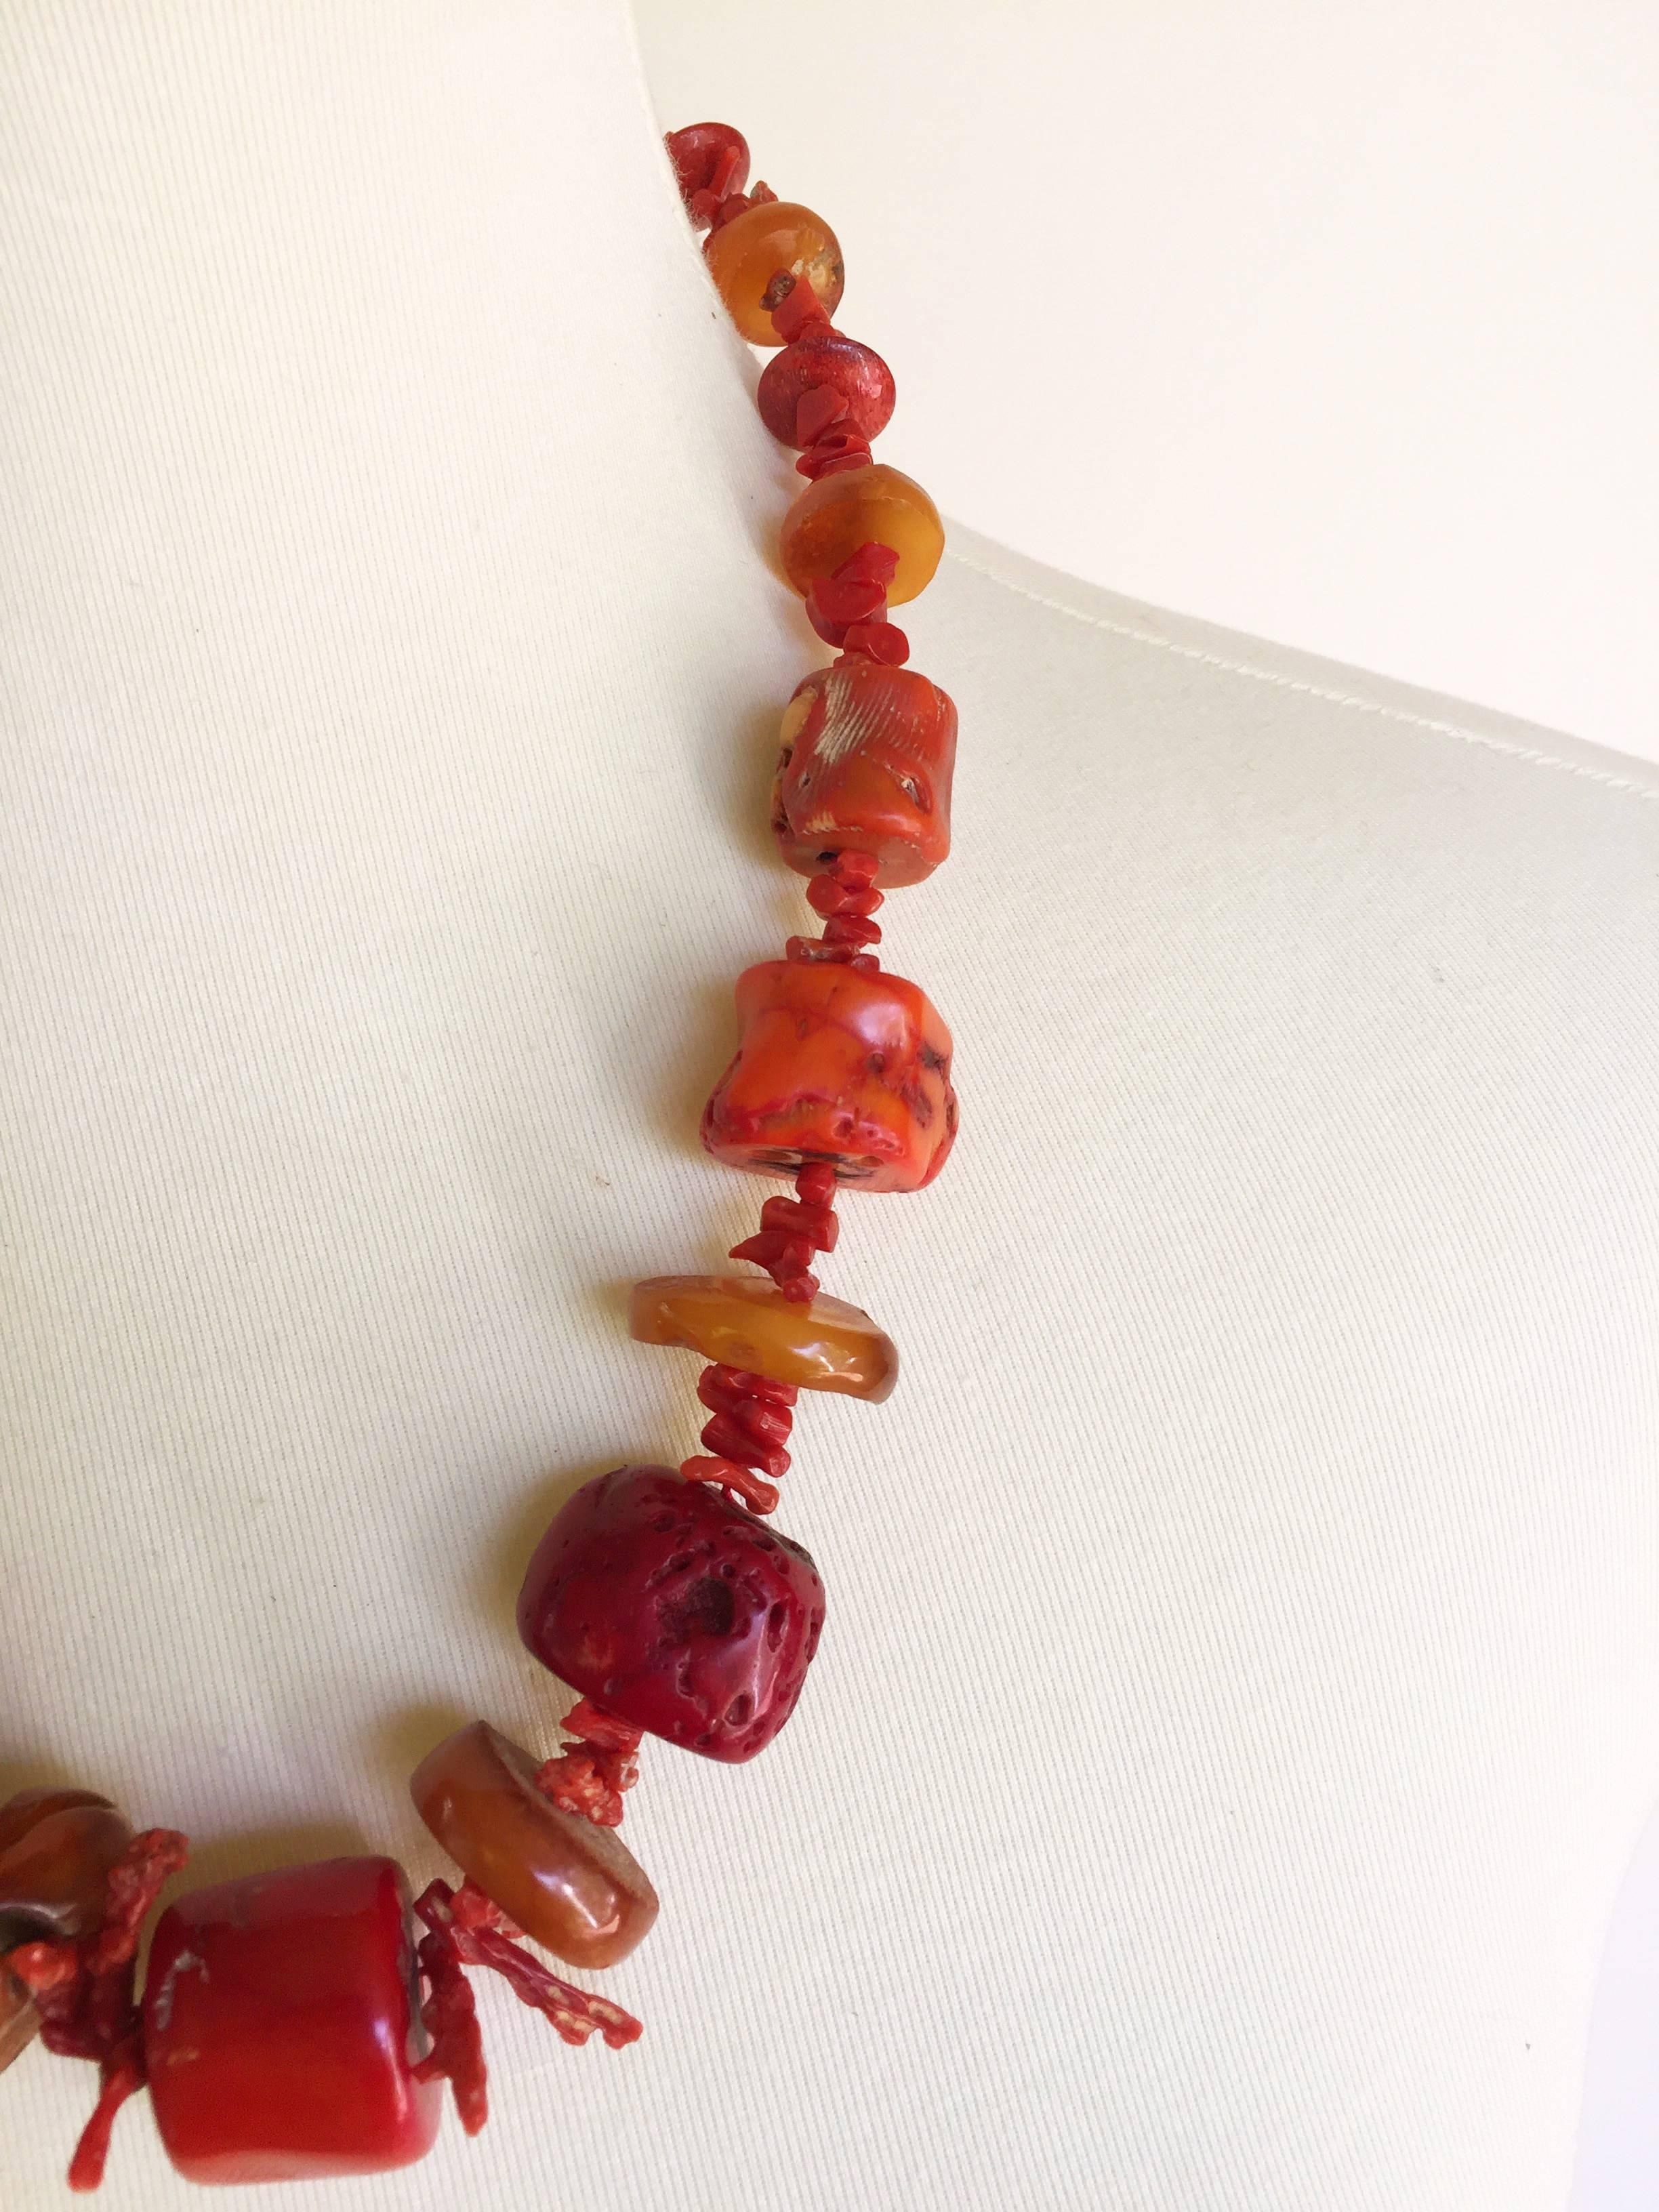 This statement necklace by Marina J is strung with graduated Middle Eastern coral and Russian amber beads, held together by a 14k yellow gold secured clasp. The necklace's large and authentic beads give the necklace a weighty look, but it is not too